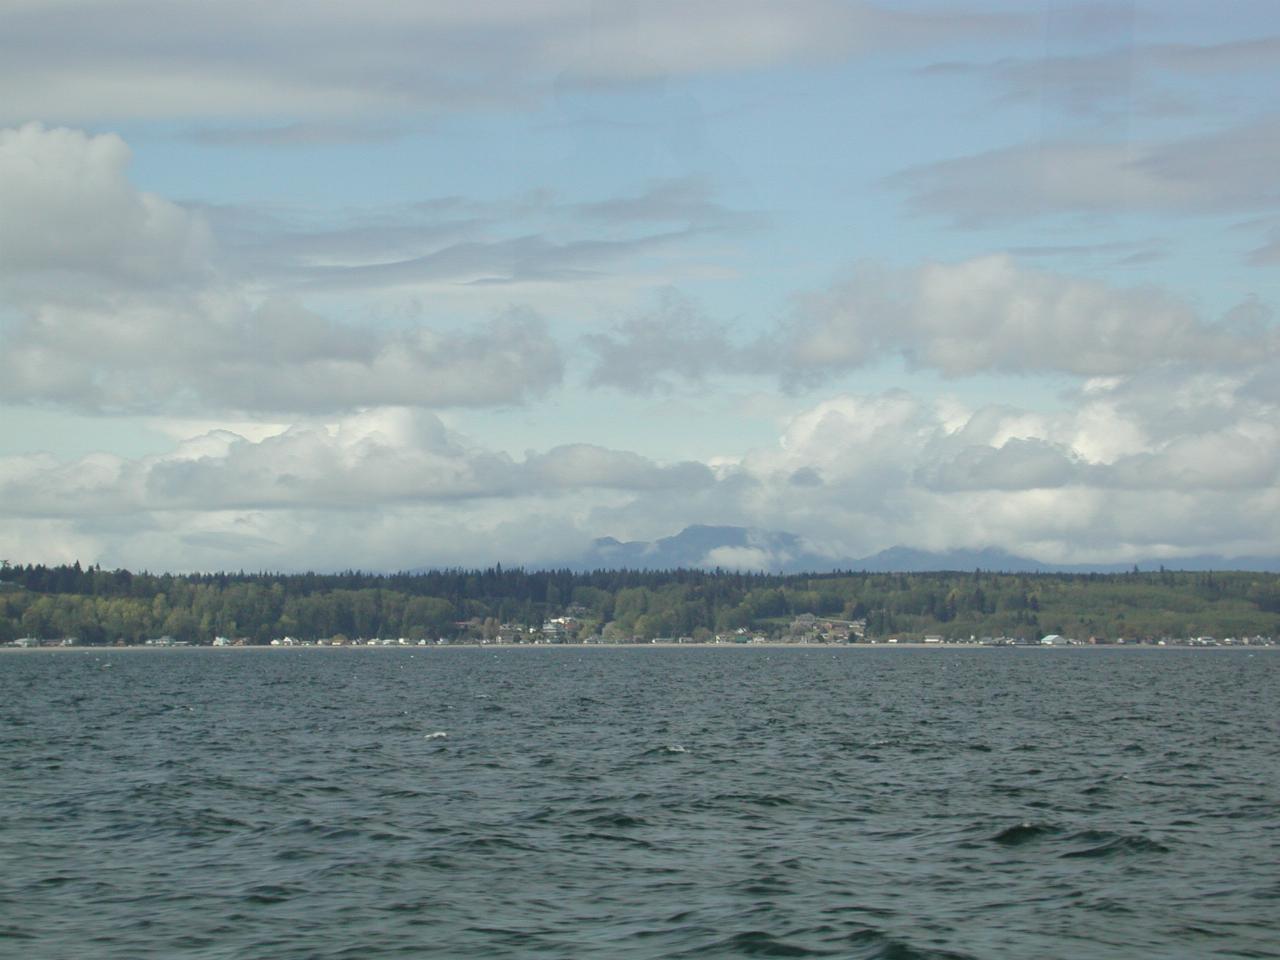 Near Kingston, looking west towards Olympic Mountains